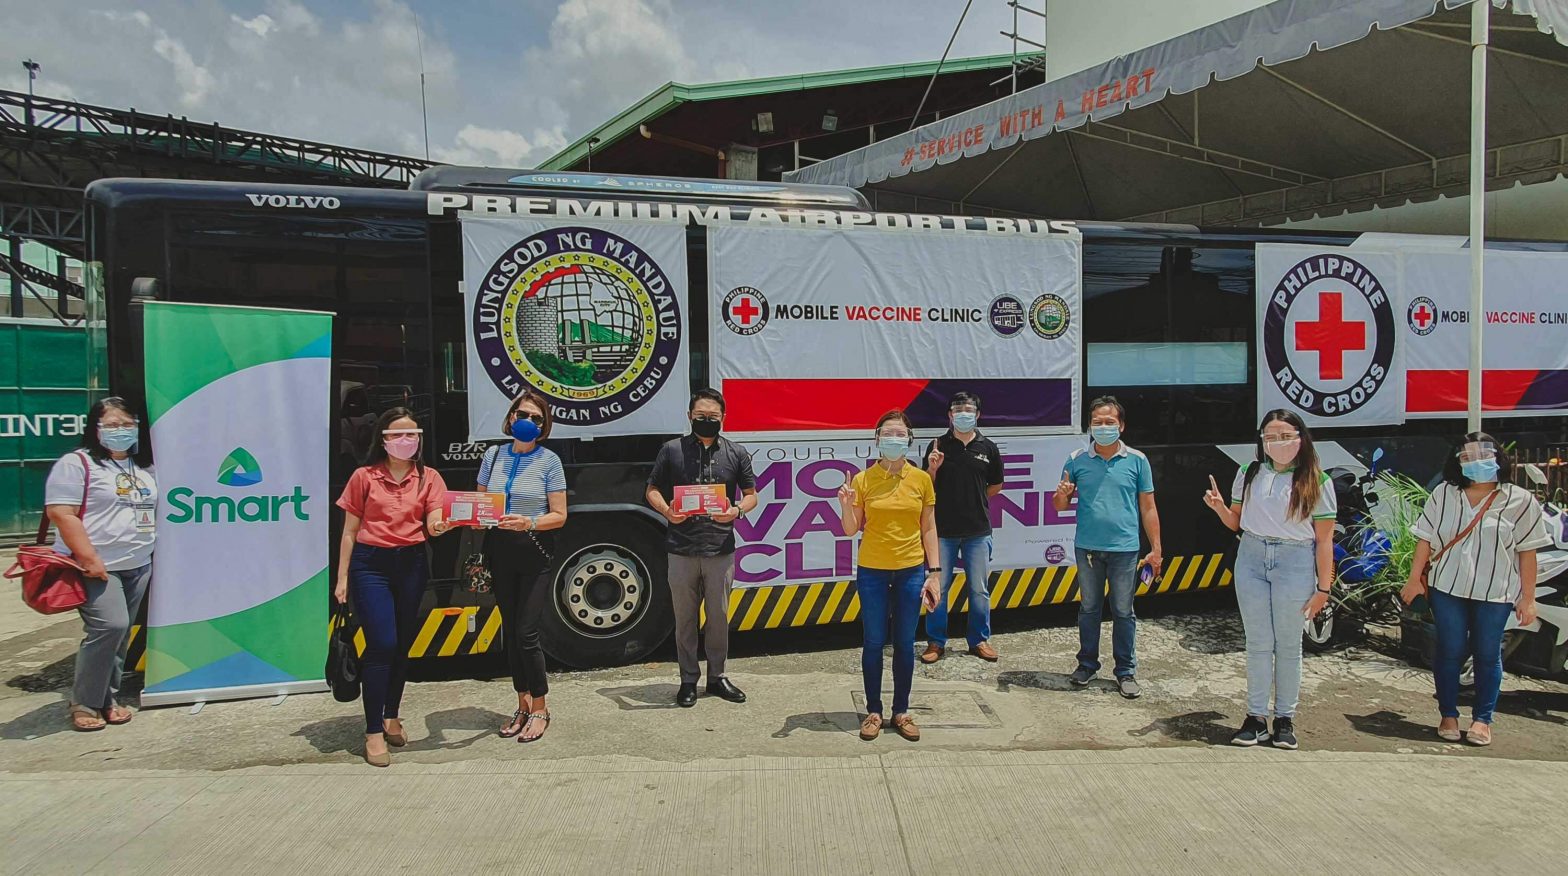 Smart provides connectivity support for Mandaue City mobile vaccination